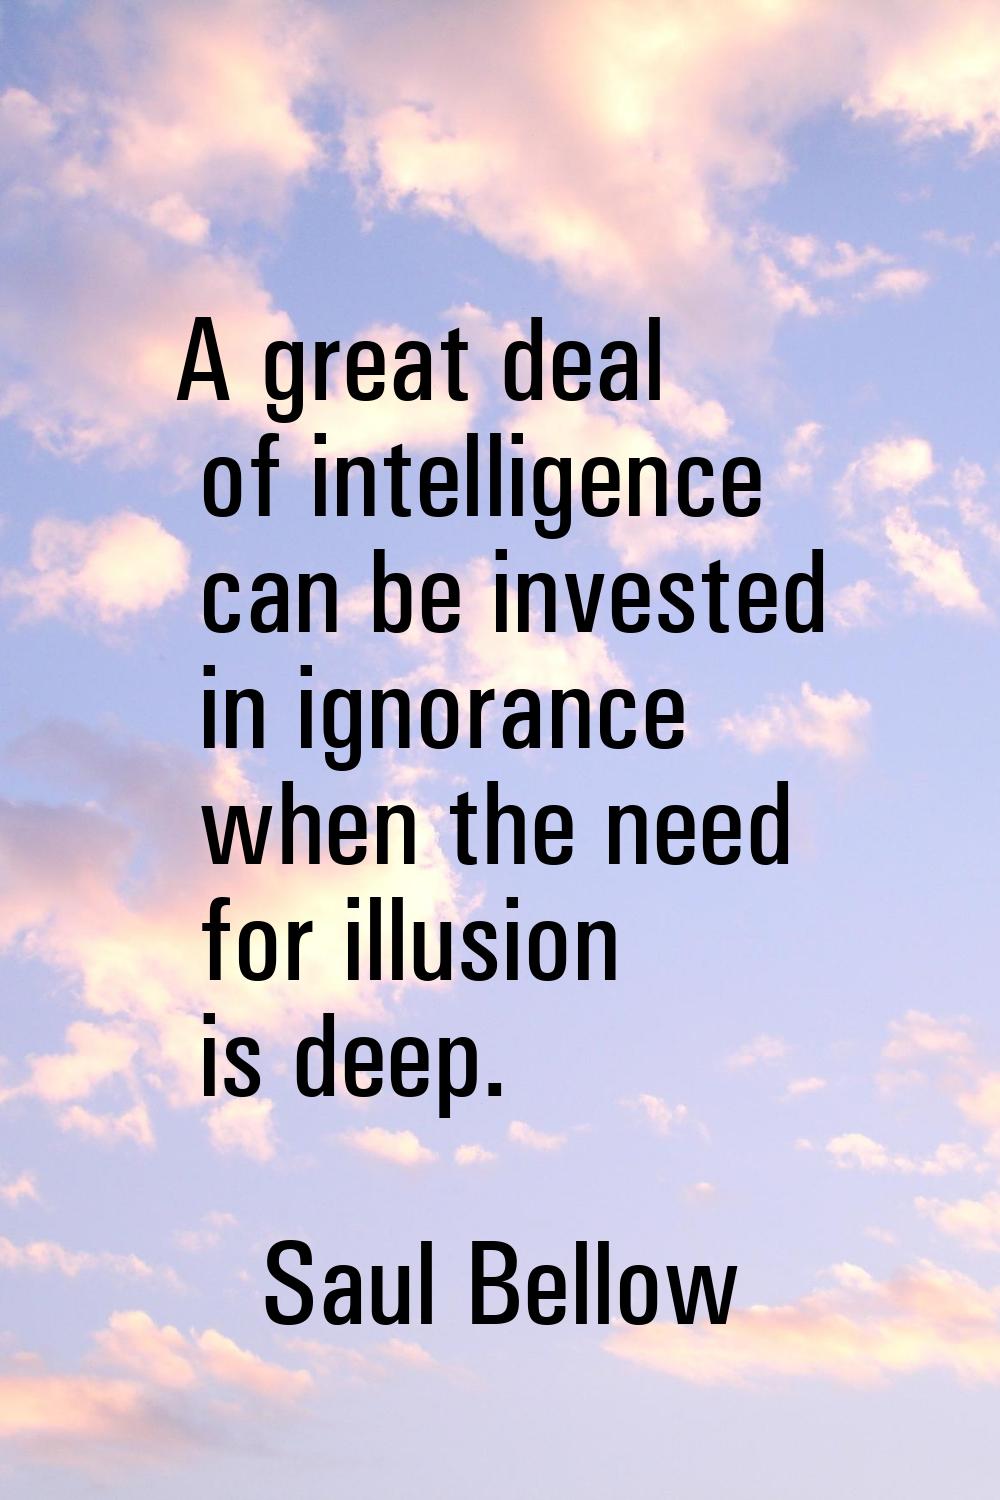 A great deal of intelligence can be invested in ignorance when the need for illusion is deep.